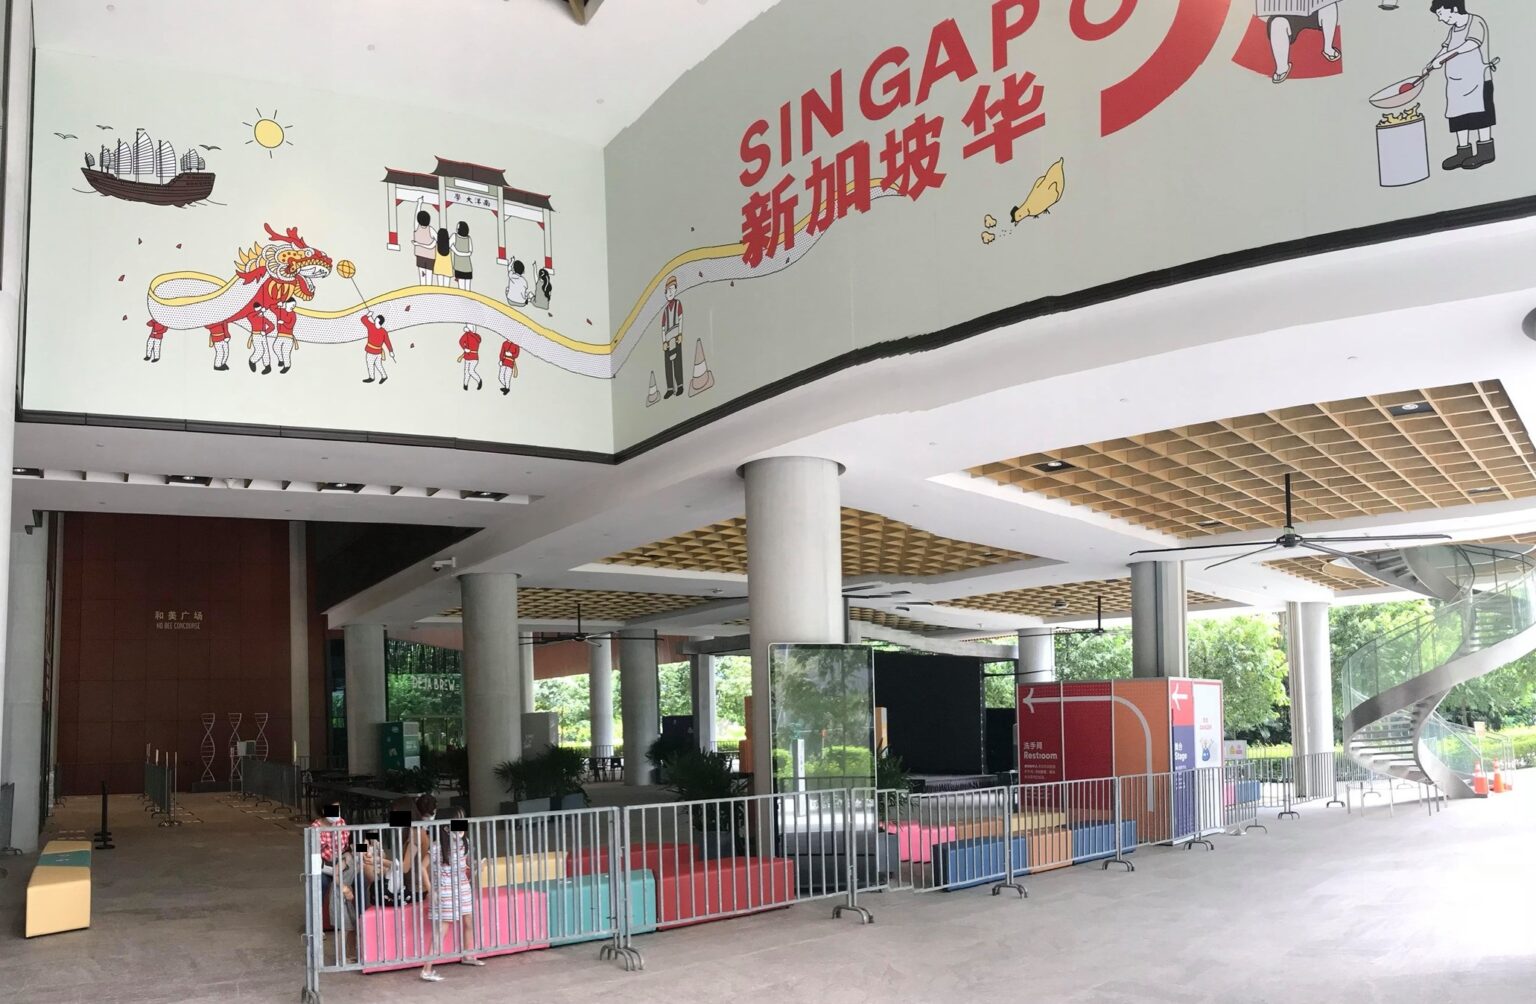 Singapore chinese cultural centre